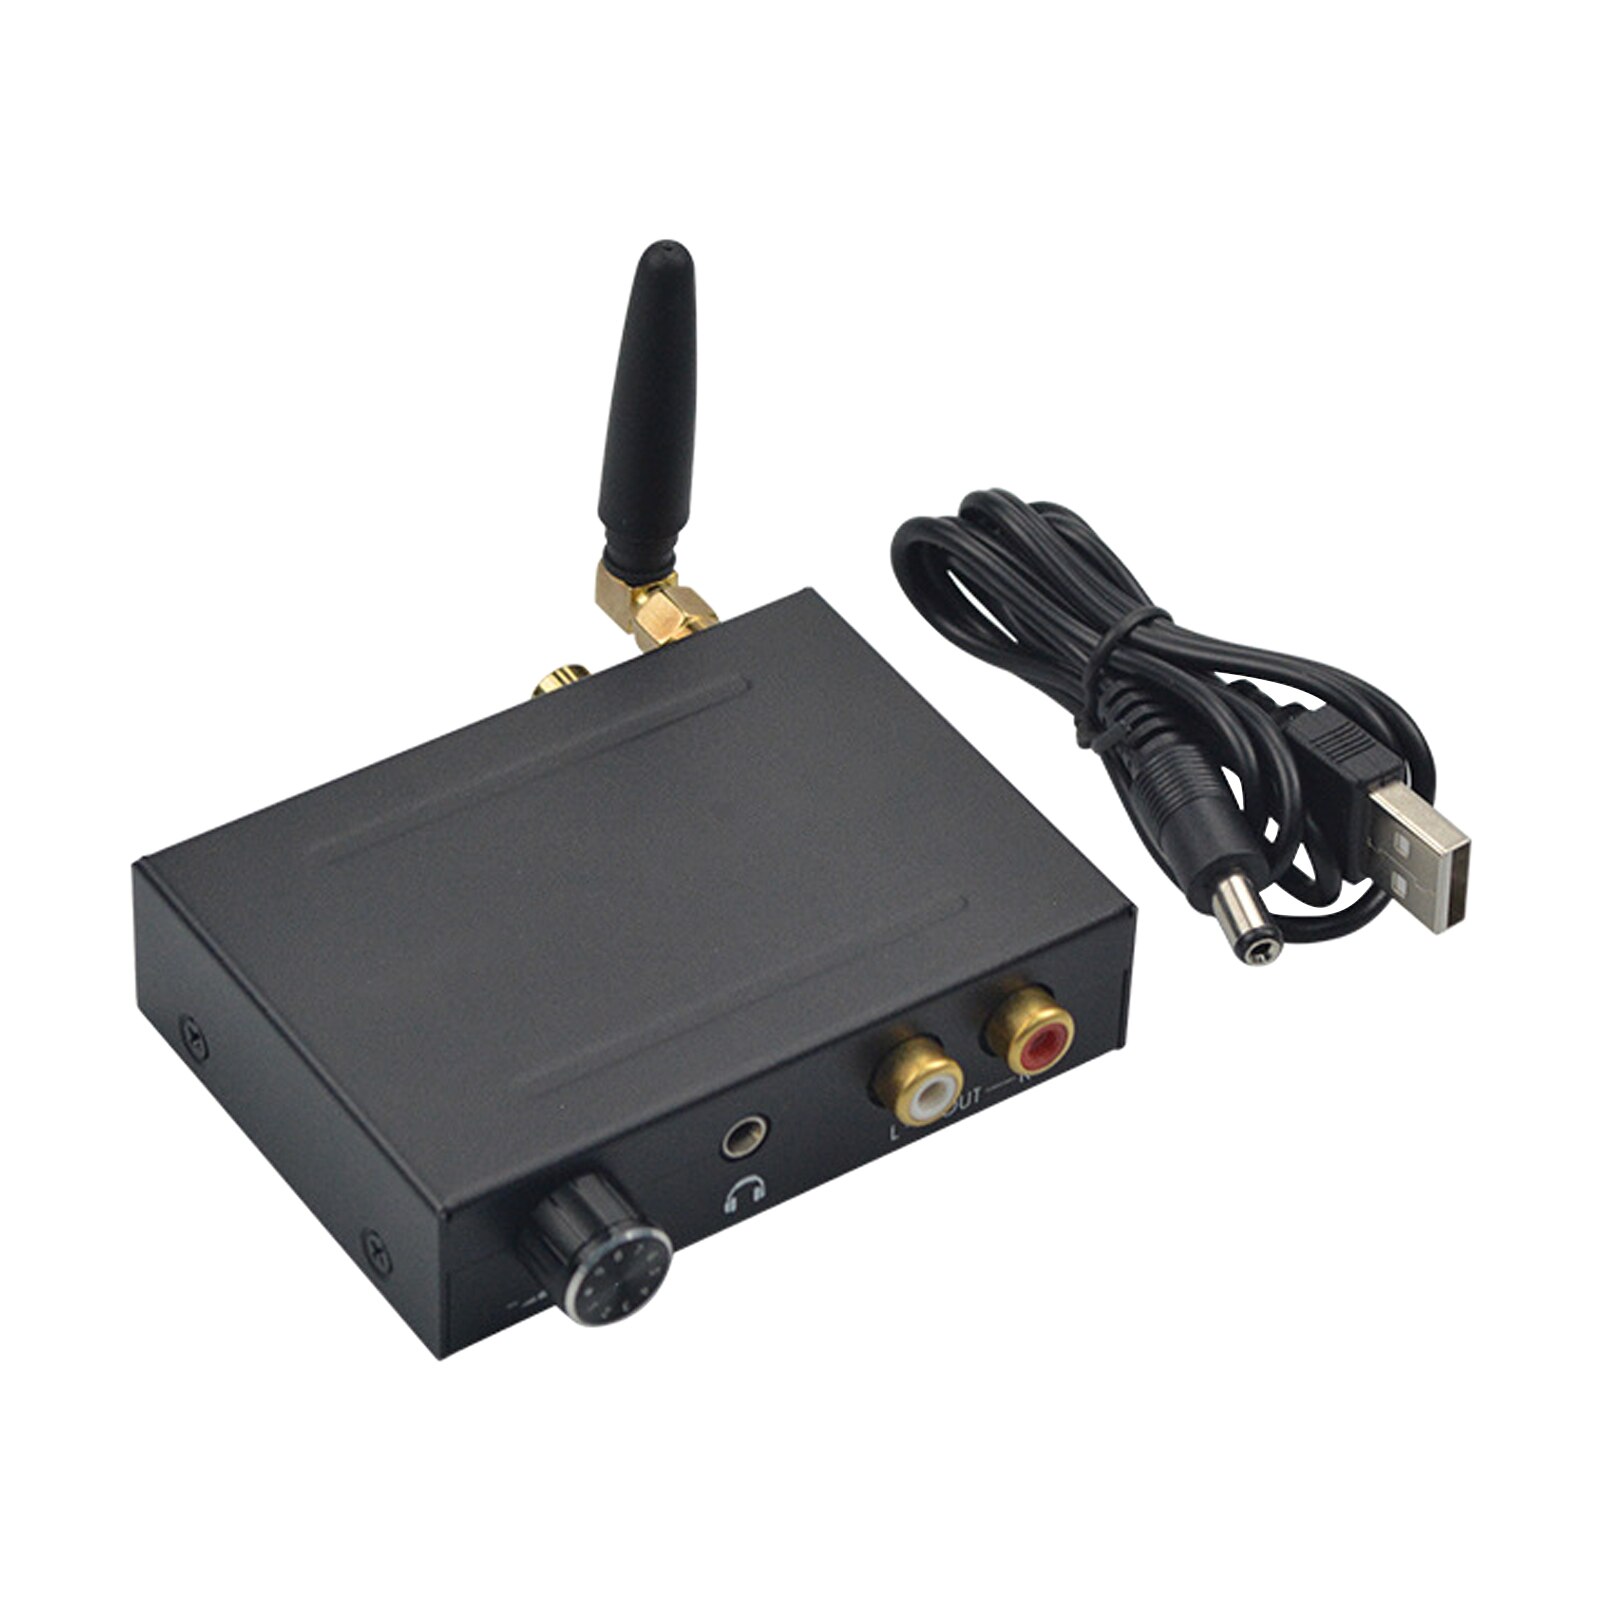 Audio Converter Adapter Home Theater 192KHz Digital To Analog 3.5mm Jack DVD Stereo DAC -compatible Receiver RCA